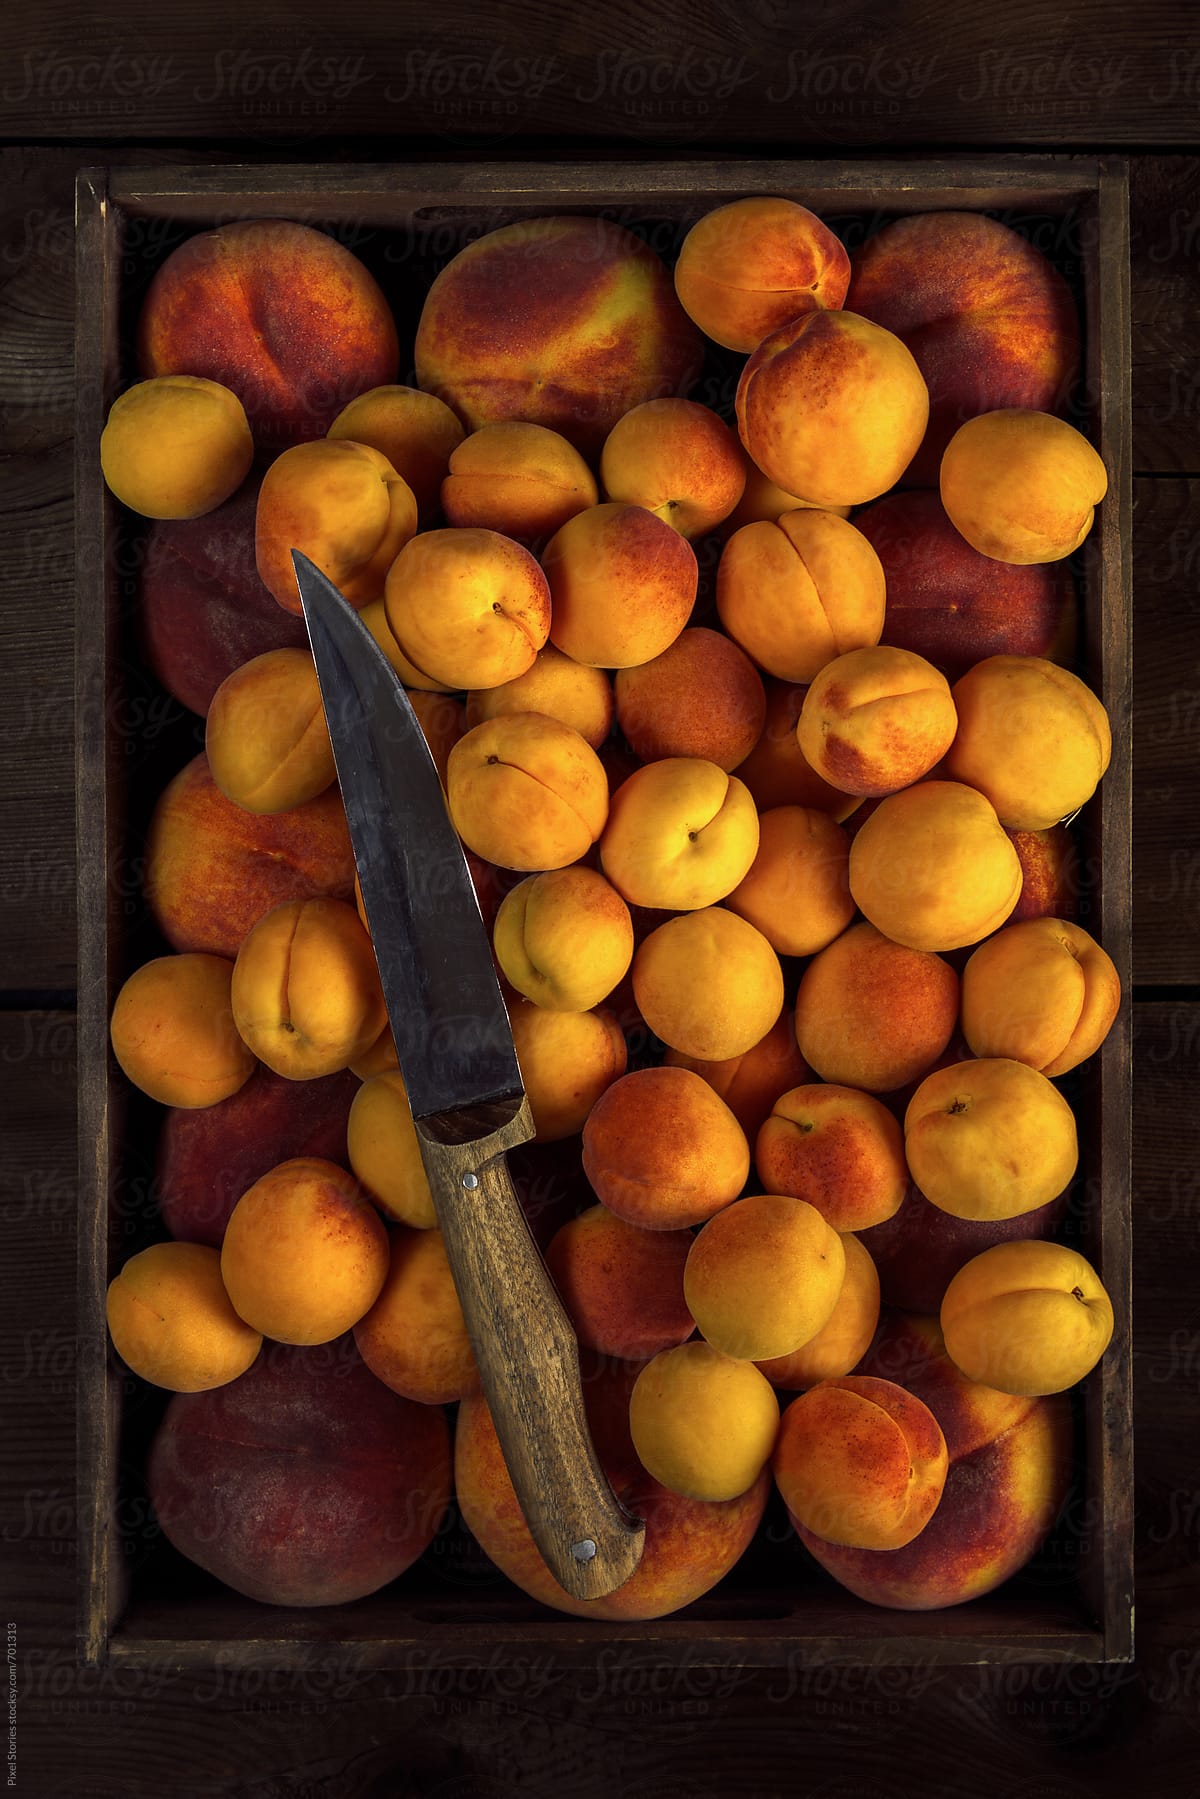 Peaches and apricots in a crate